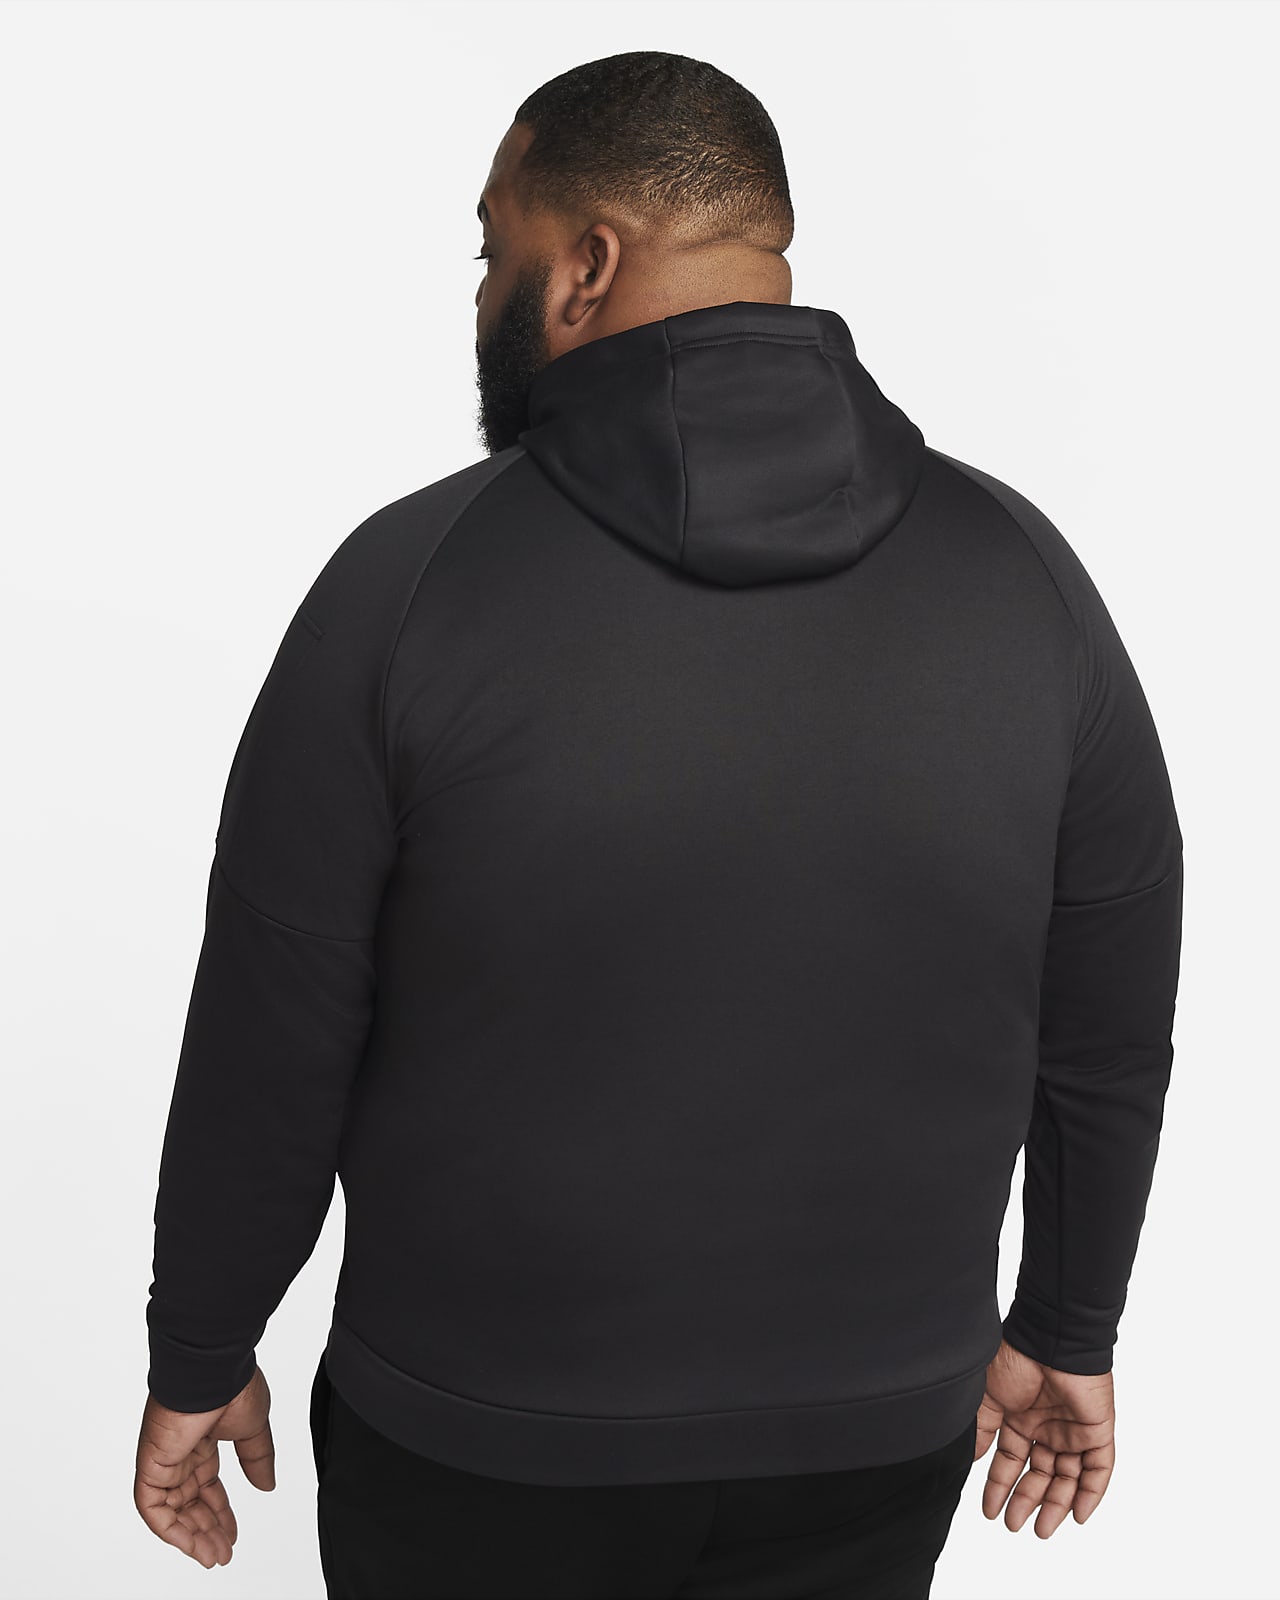 Nike Therma Men S Fit Hooded